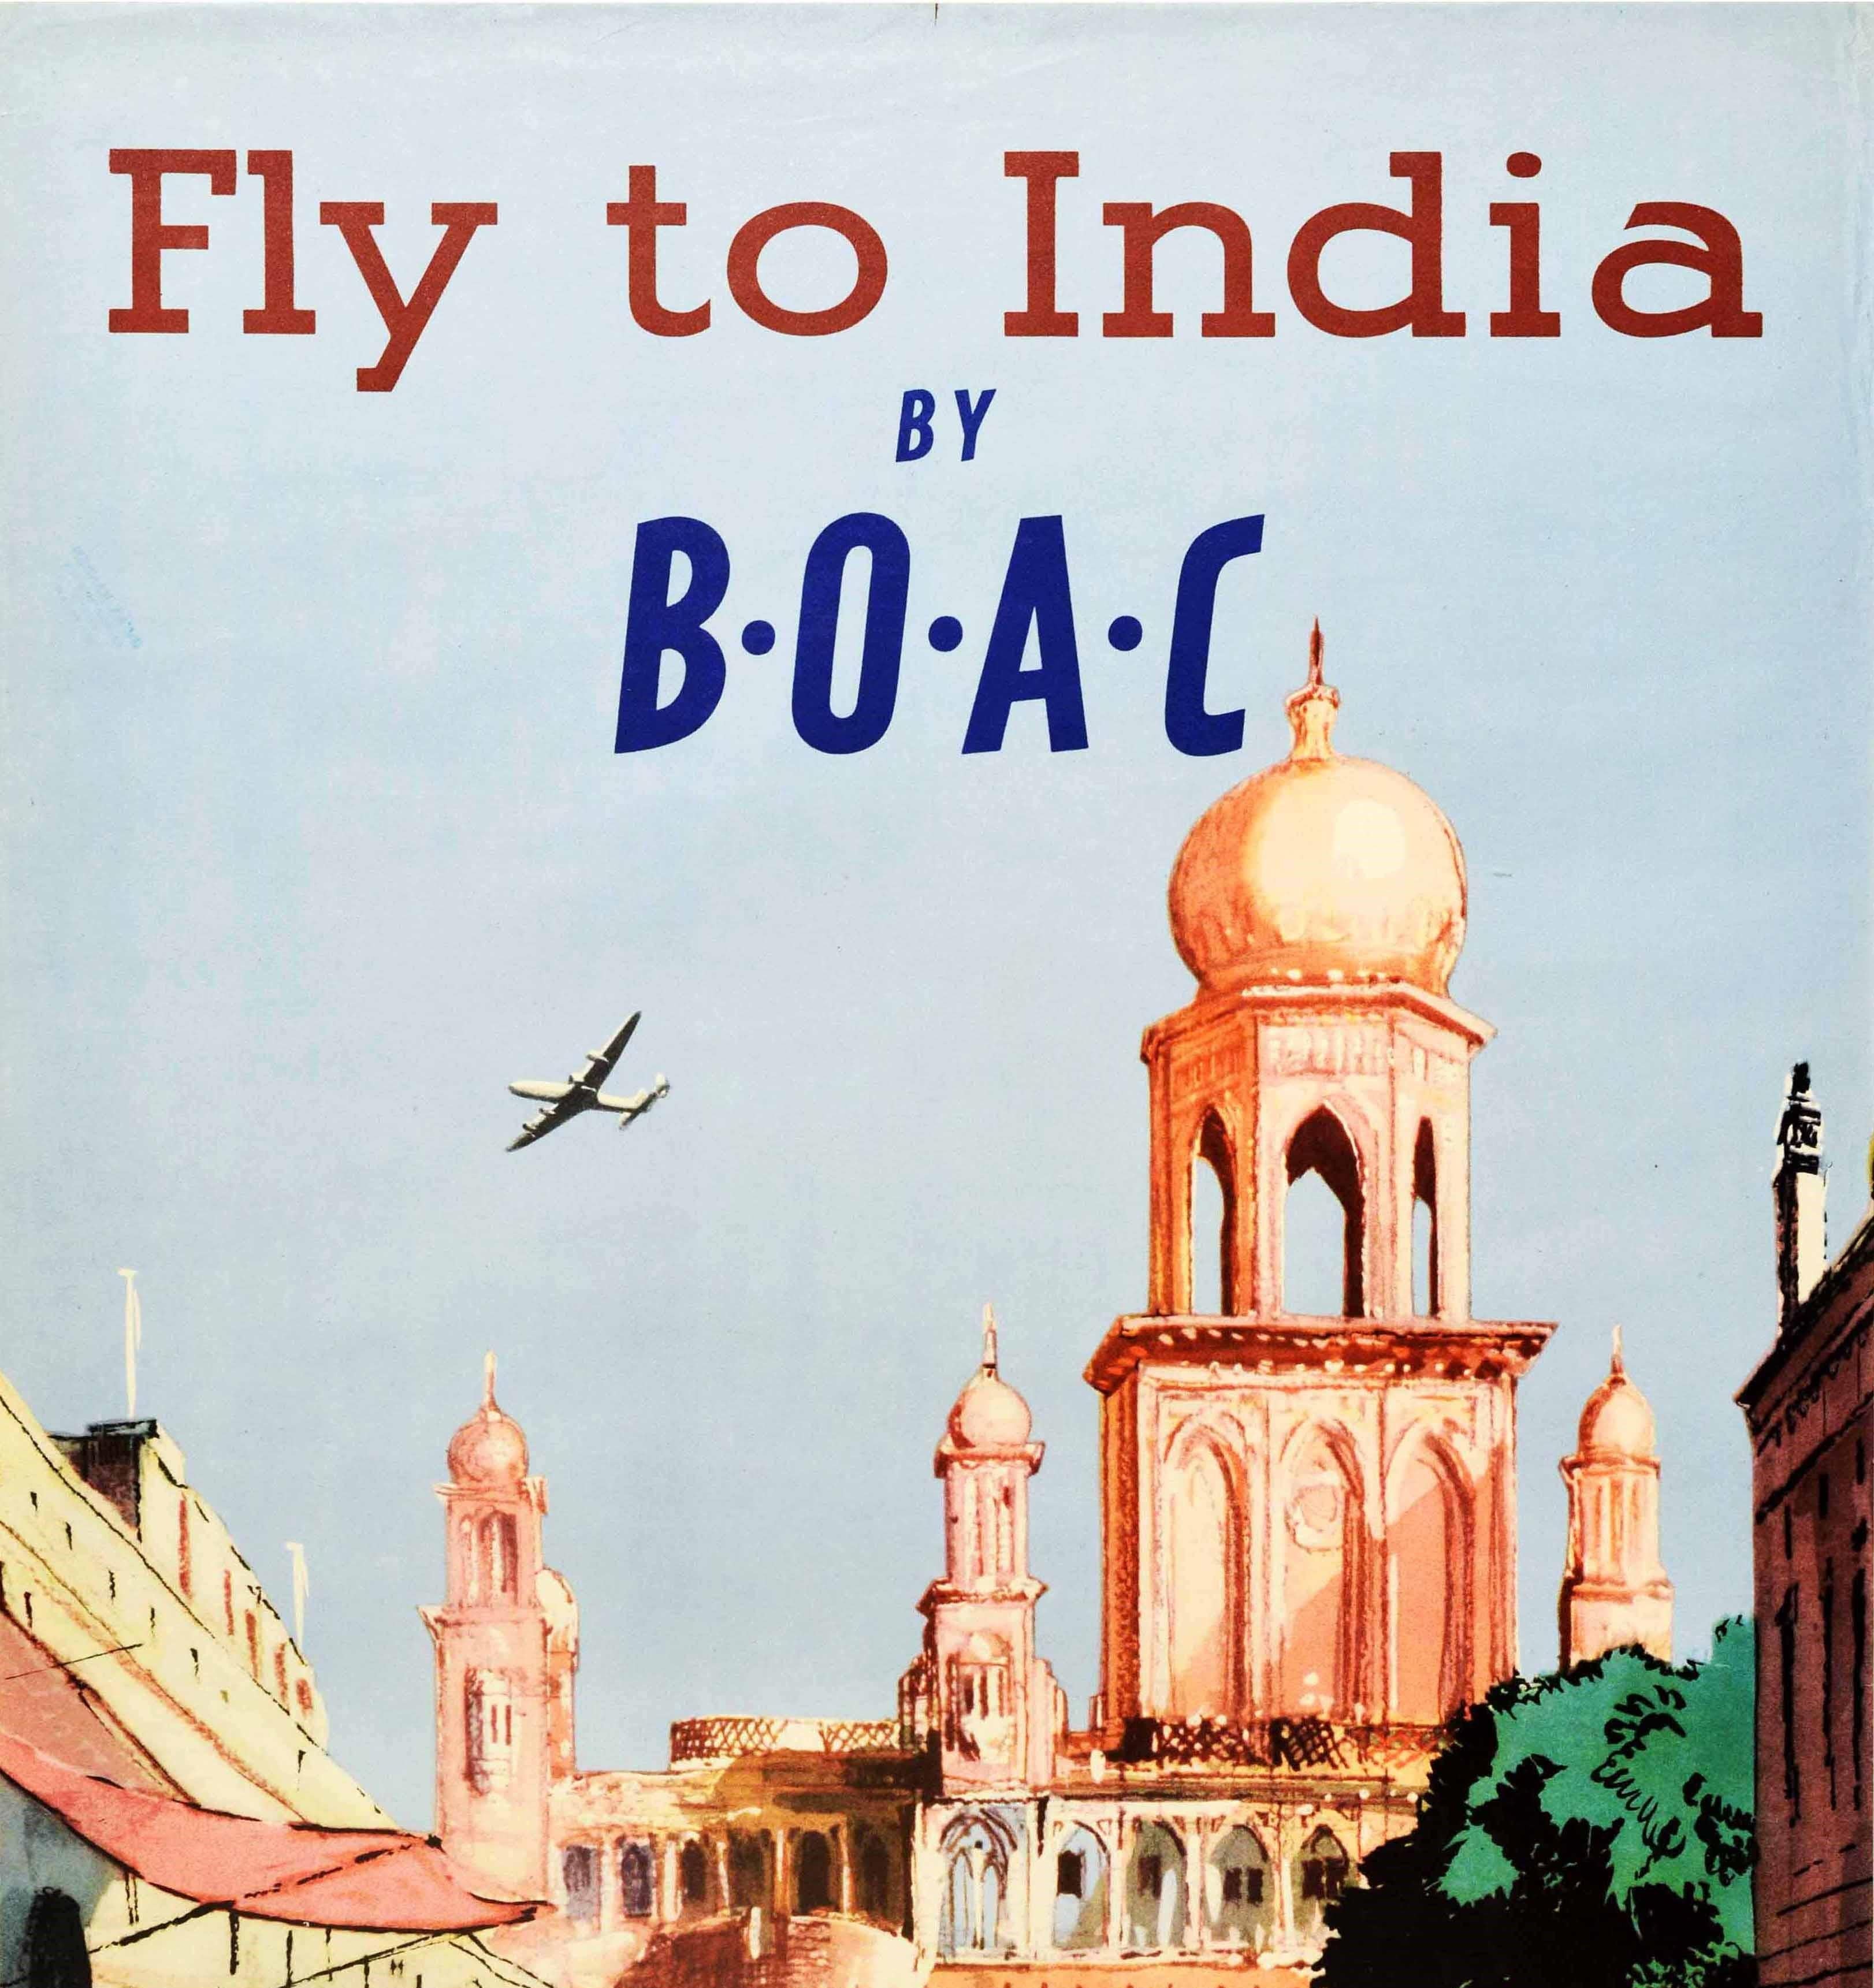 Original vintage travel poster Fly to India by BOAC featuring a great image of a smiling lady in traditional Indian clothing, jewellery and headdress and a child looking at the viewer while walking through a busy street with people in white